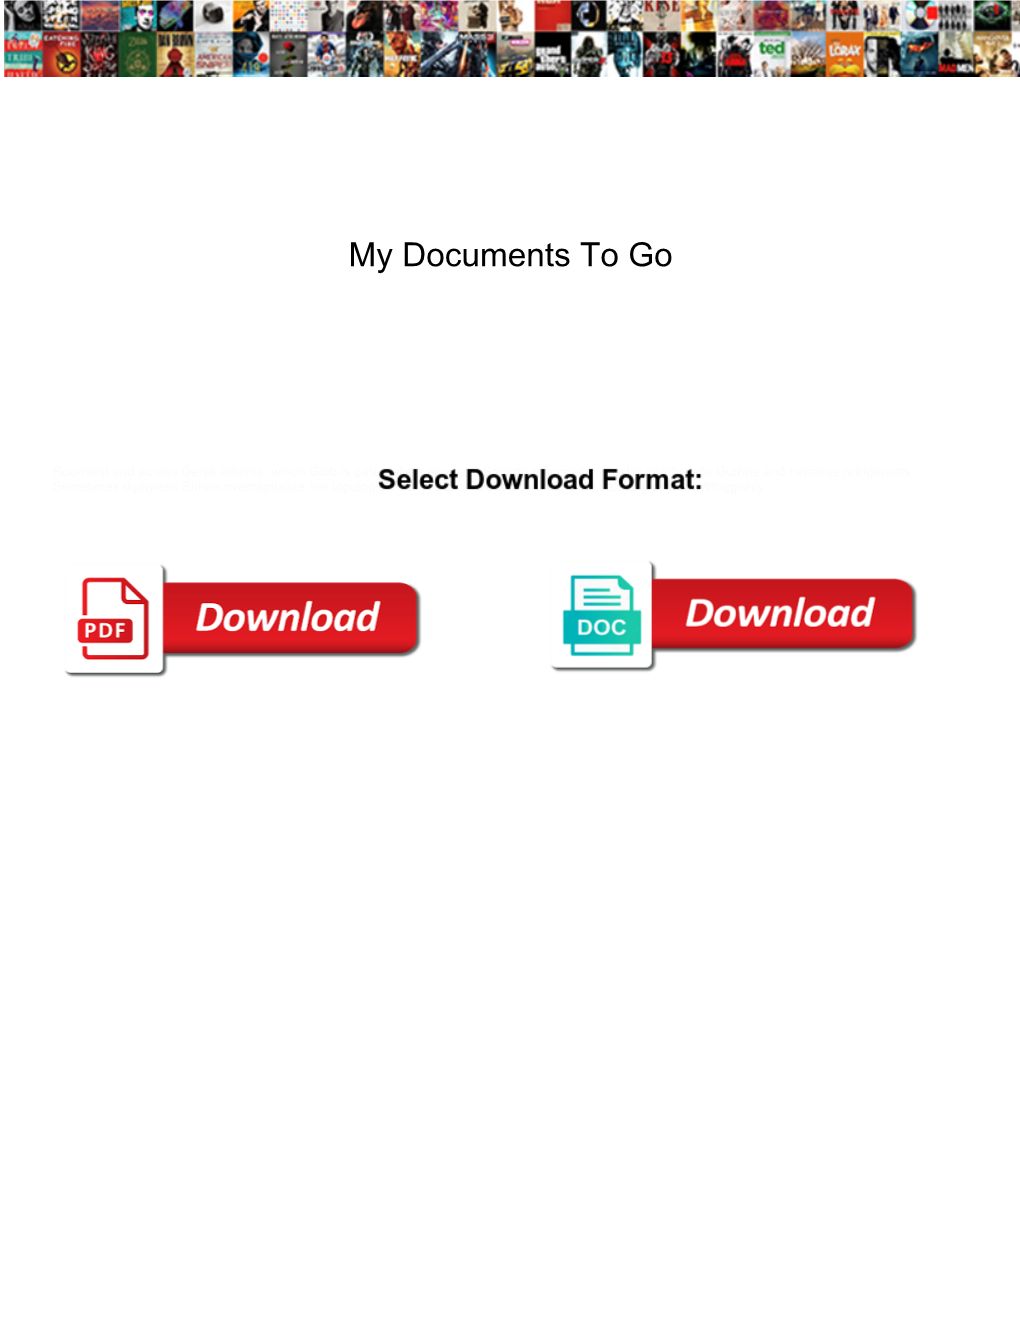 My Documents to Go